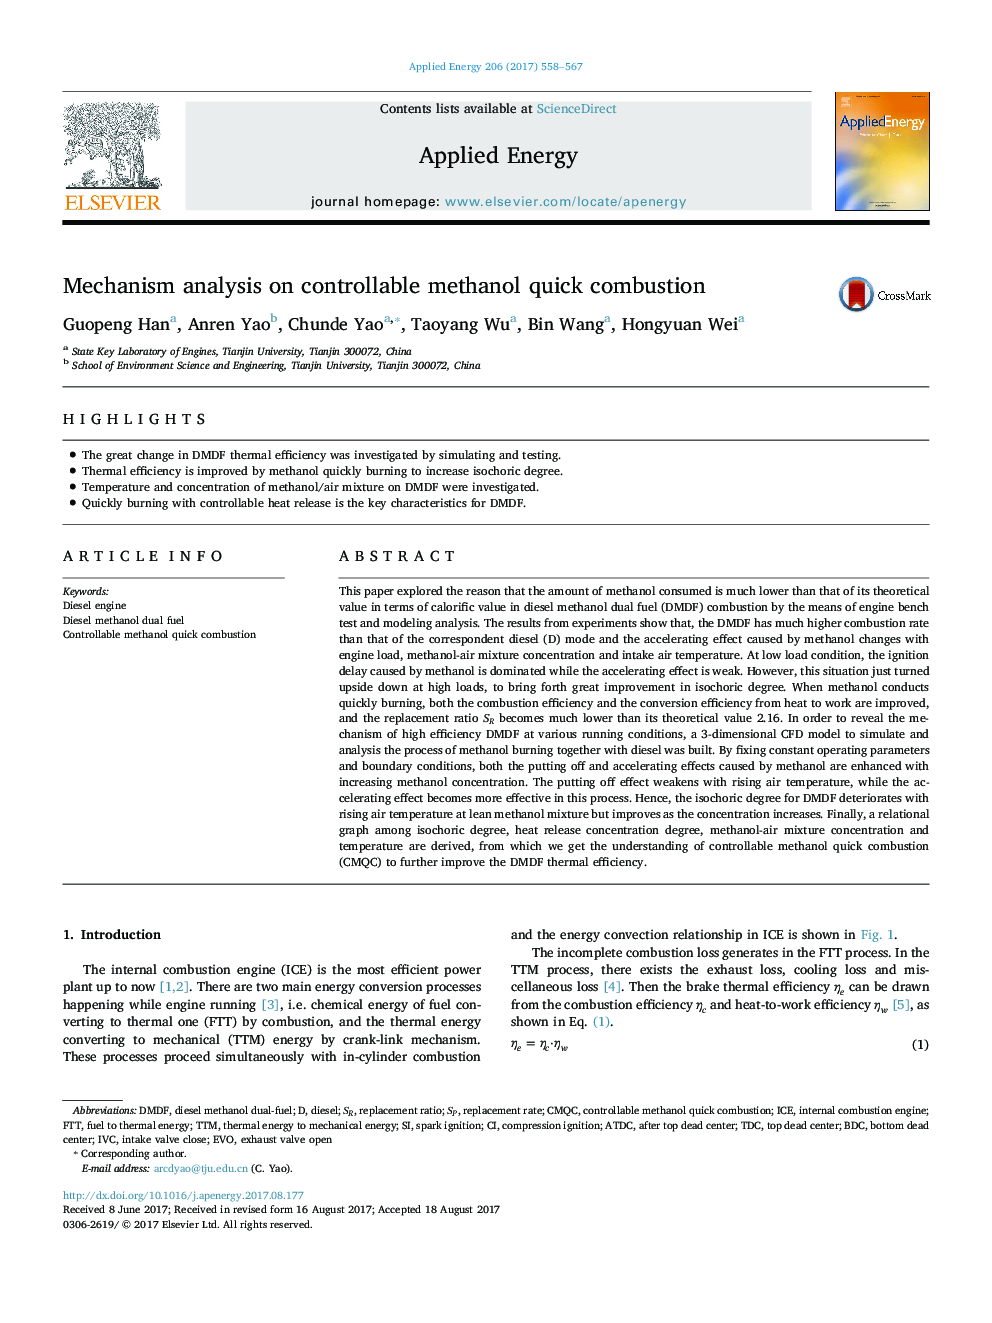 Mechanism analysis on controllable methanol quick combustion